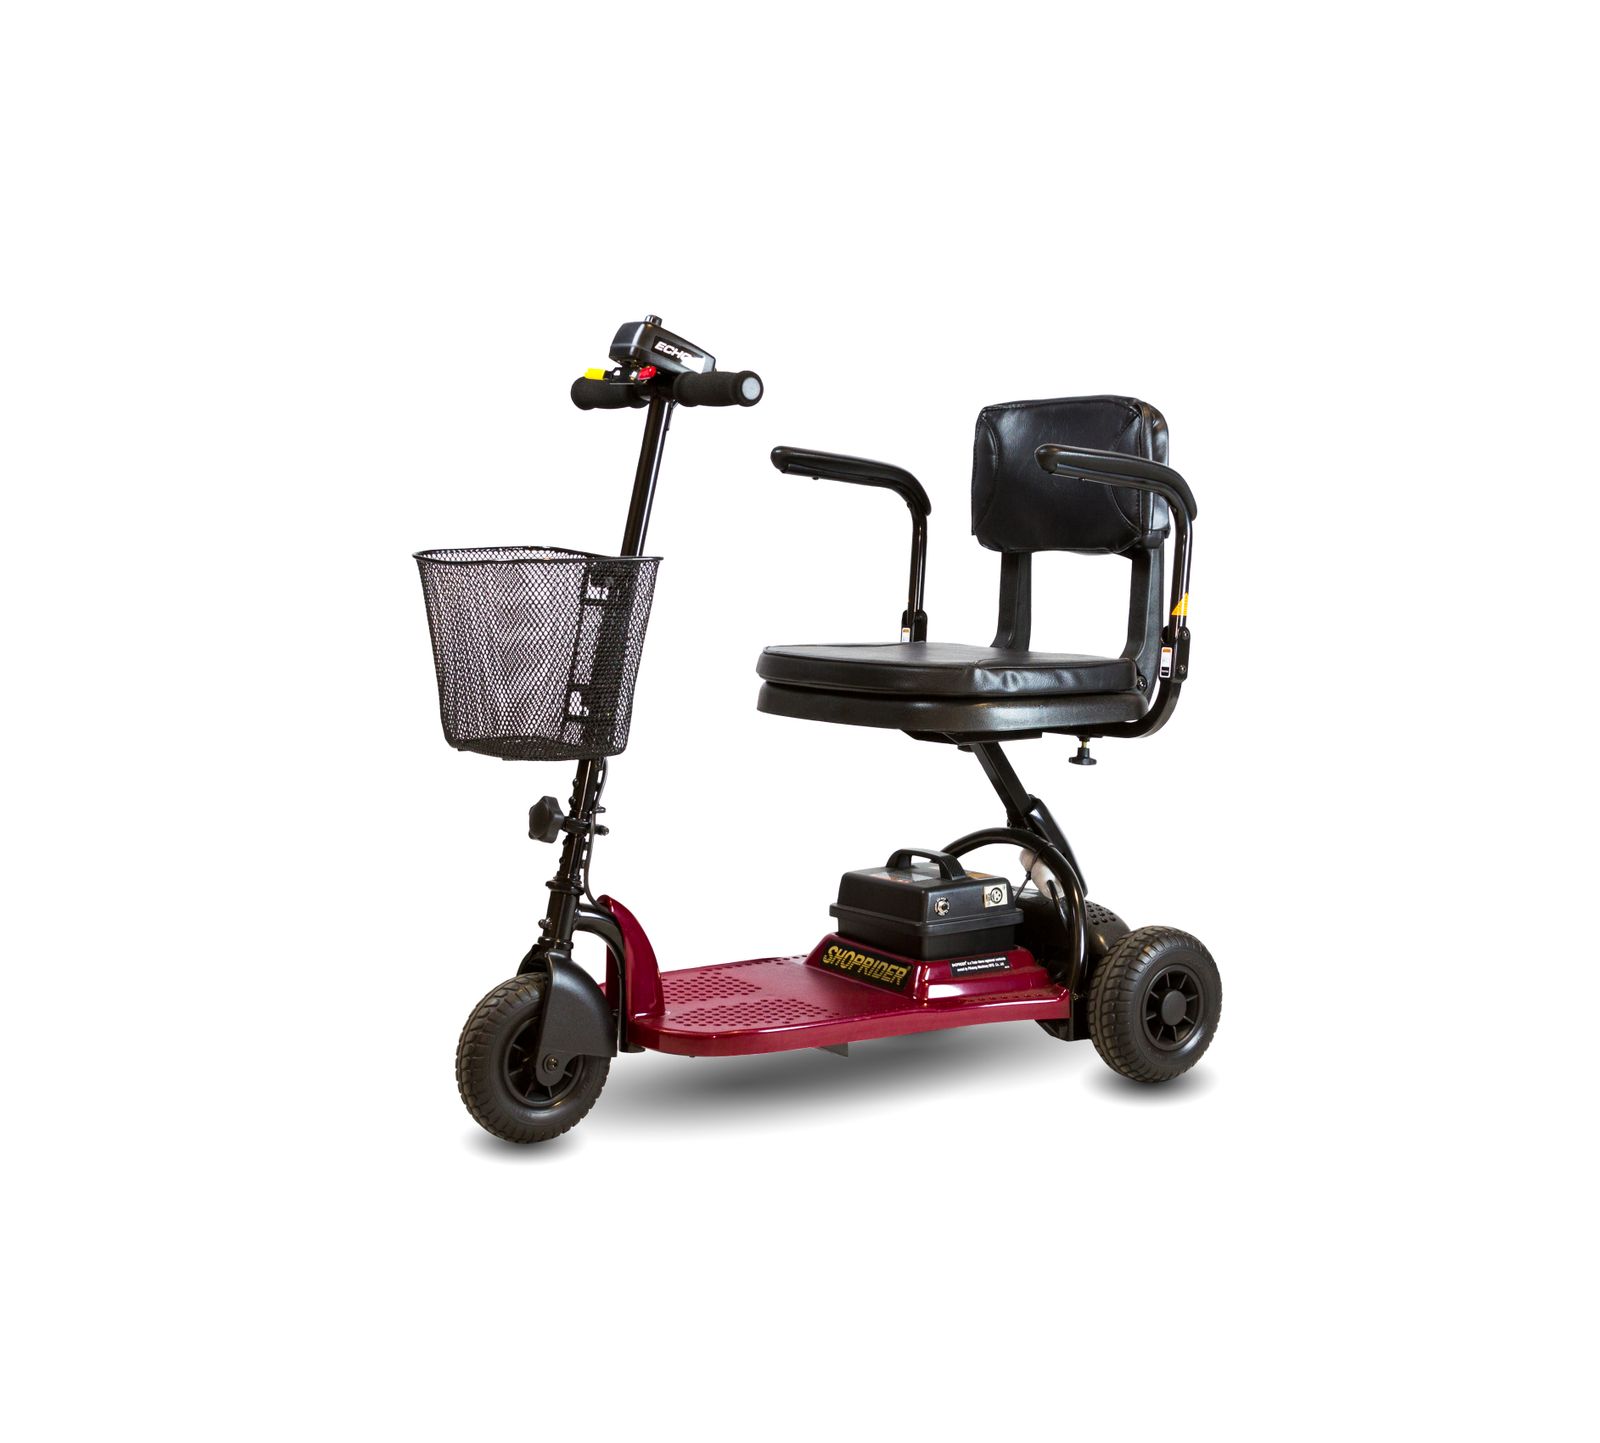 Shoprider Echo 3 wheel mobility scooter